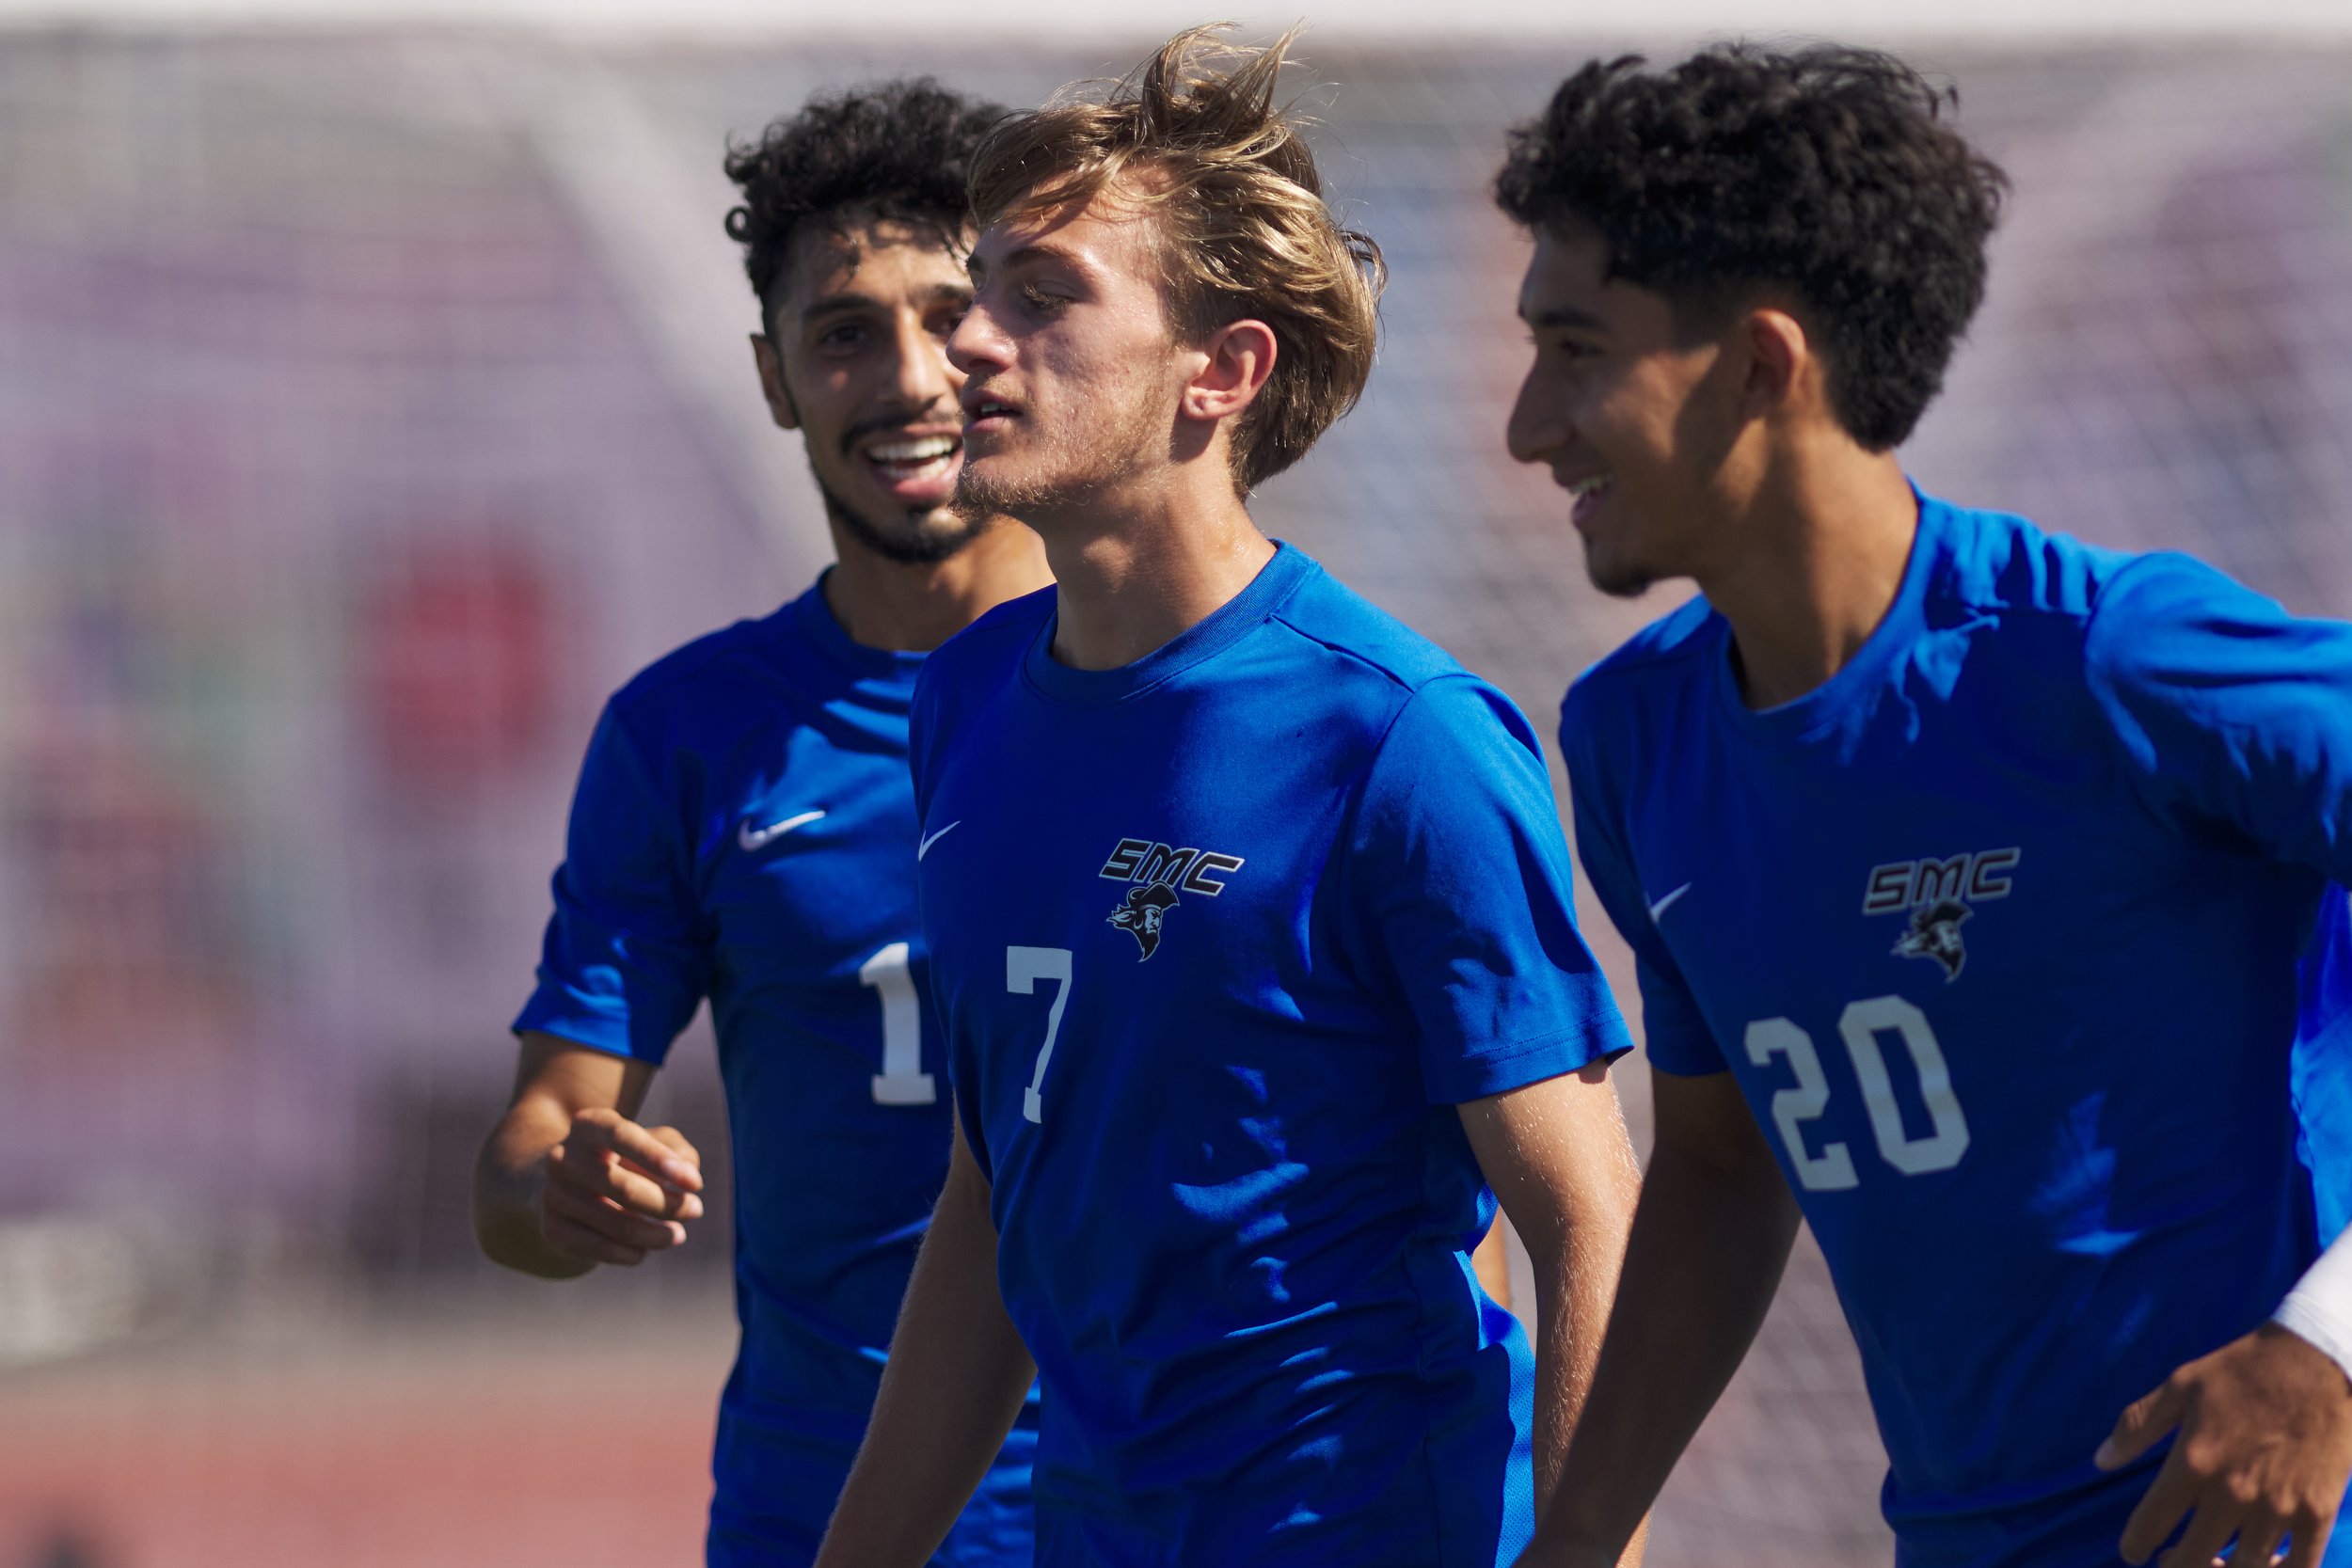  Santa Monica College Corsairs' Roey Kivity, Darren Lewis, and Alex Hernandez celebrate after Lewis' goal during the men's soccer match against the Santa Barbara City College Vaqueros on Wednesday, Oct. 11, 2023, at Corsair Field in Santa Monica, Cal